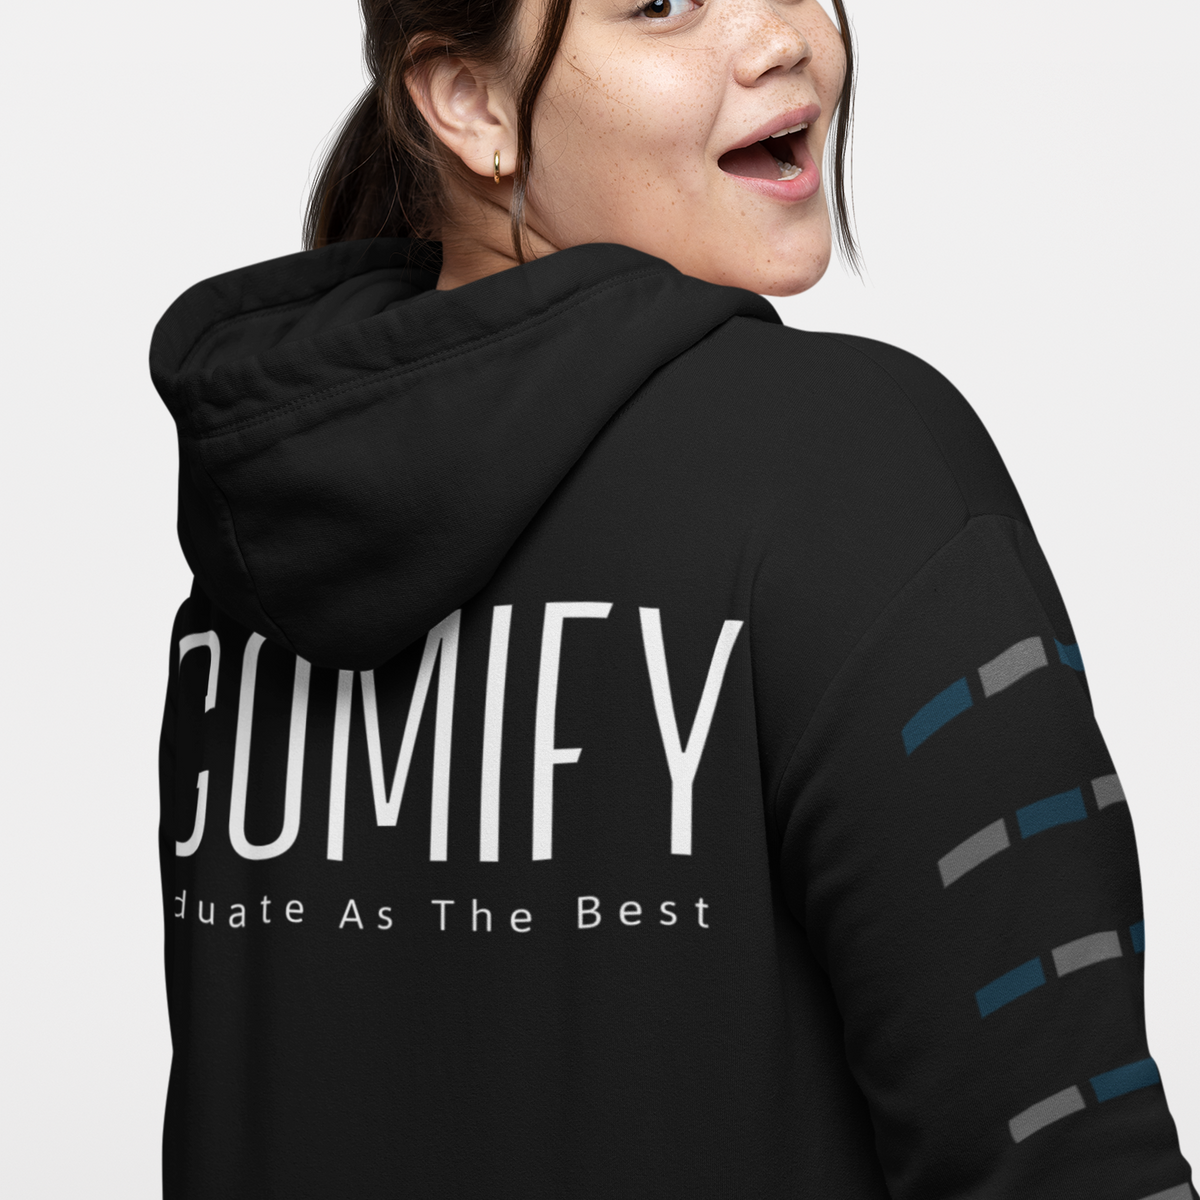 Ecomify™ Ultimate Pullover Hoodie